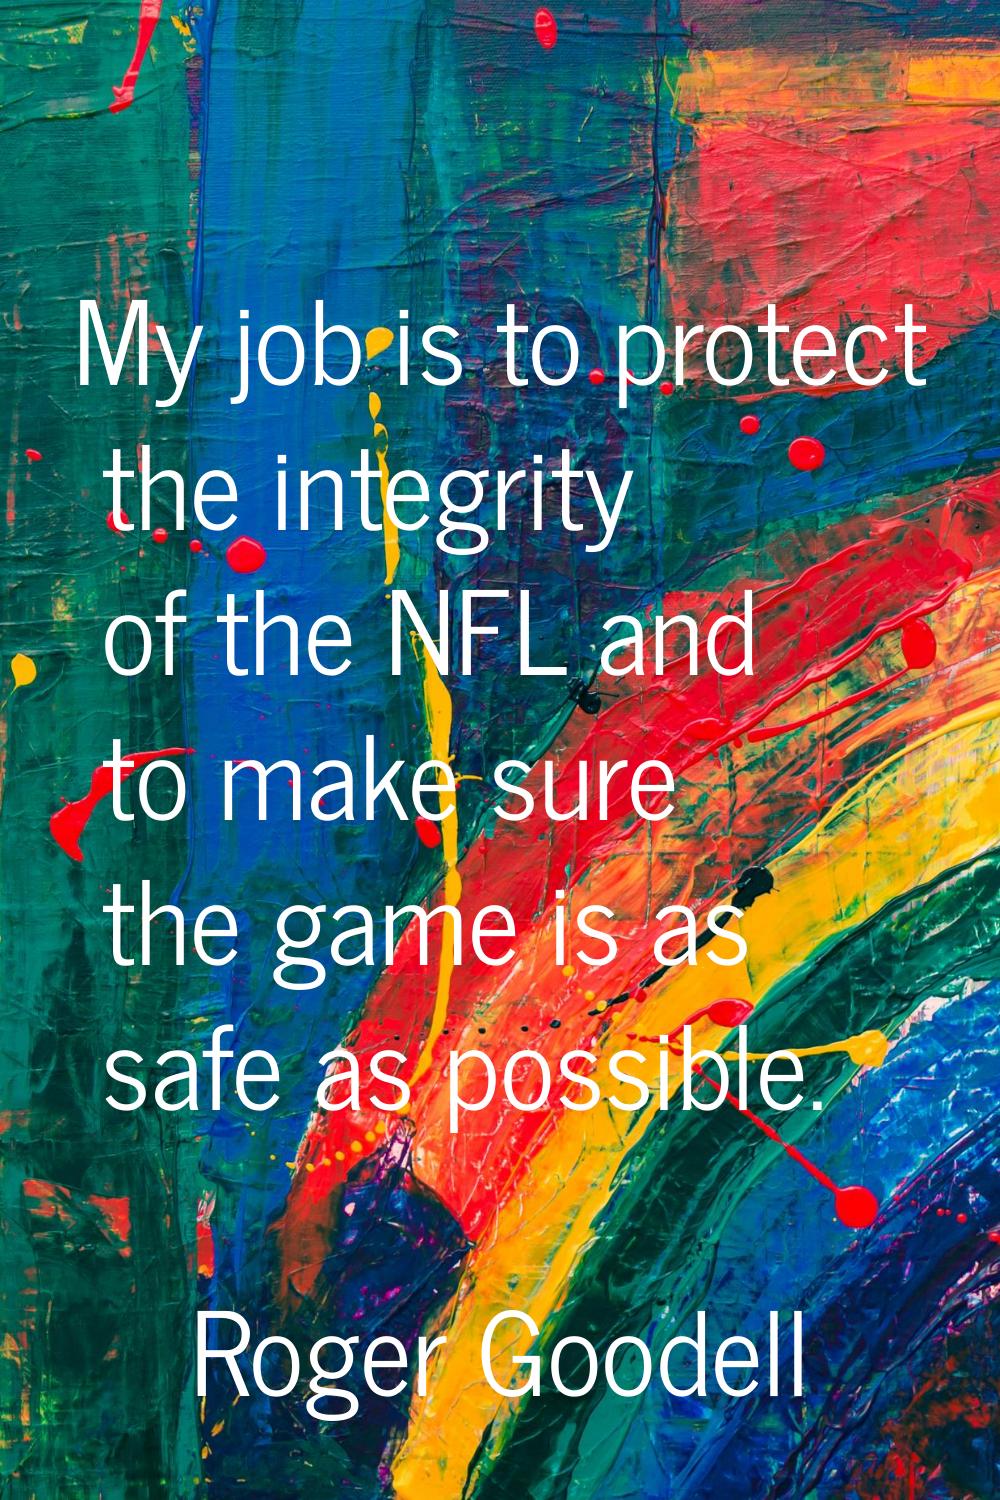 My job is to protect the integrity of the NFL and to make sure the game is as safe as possible.